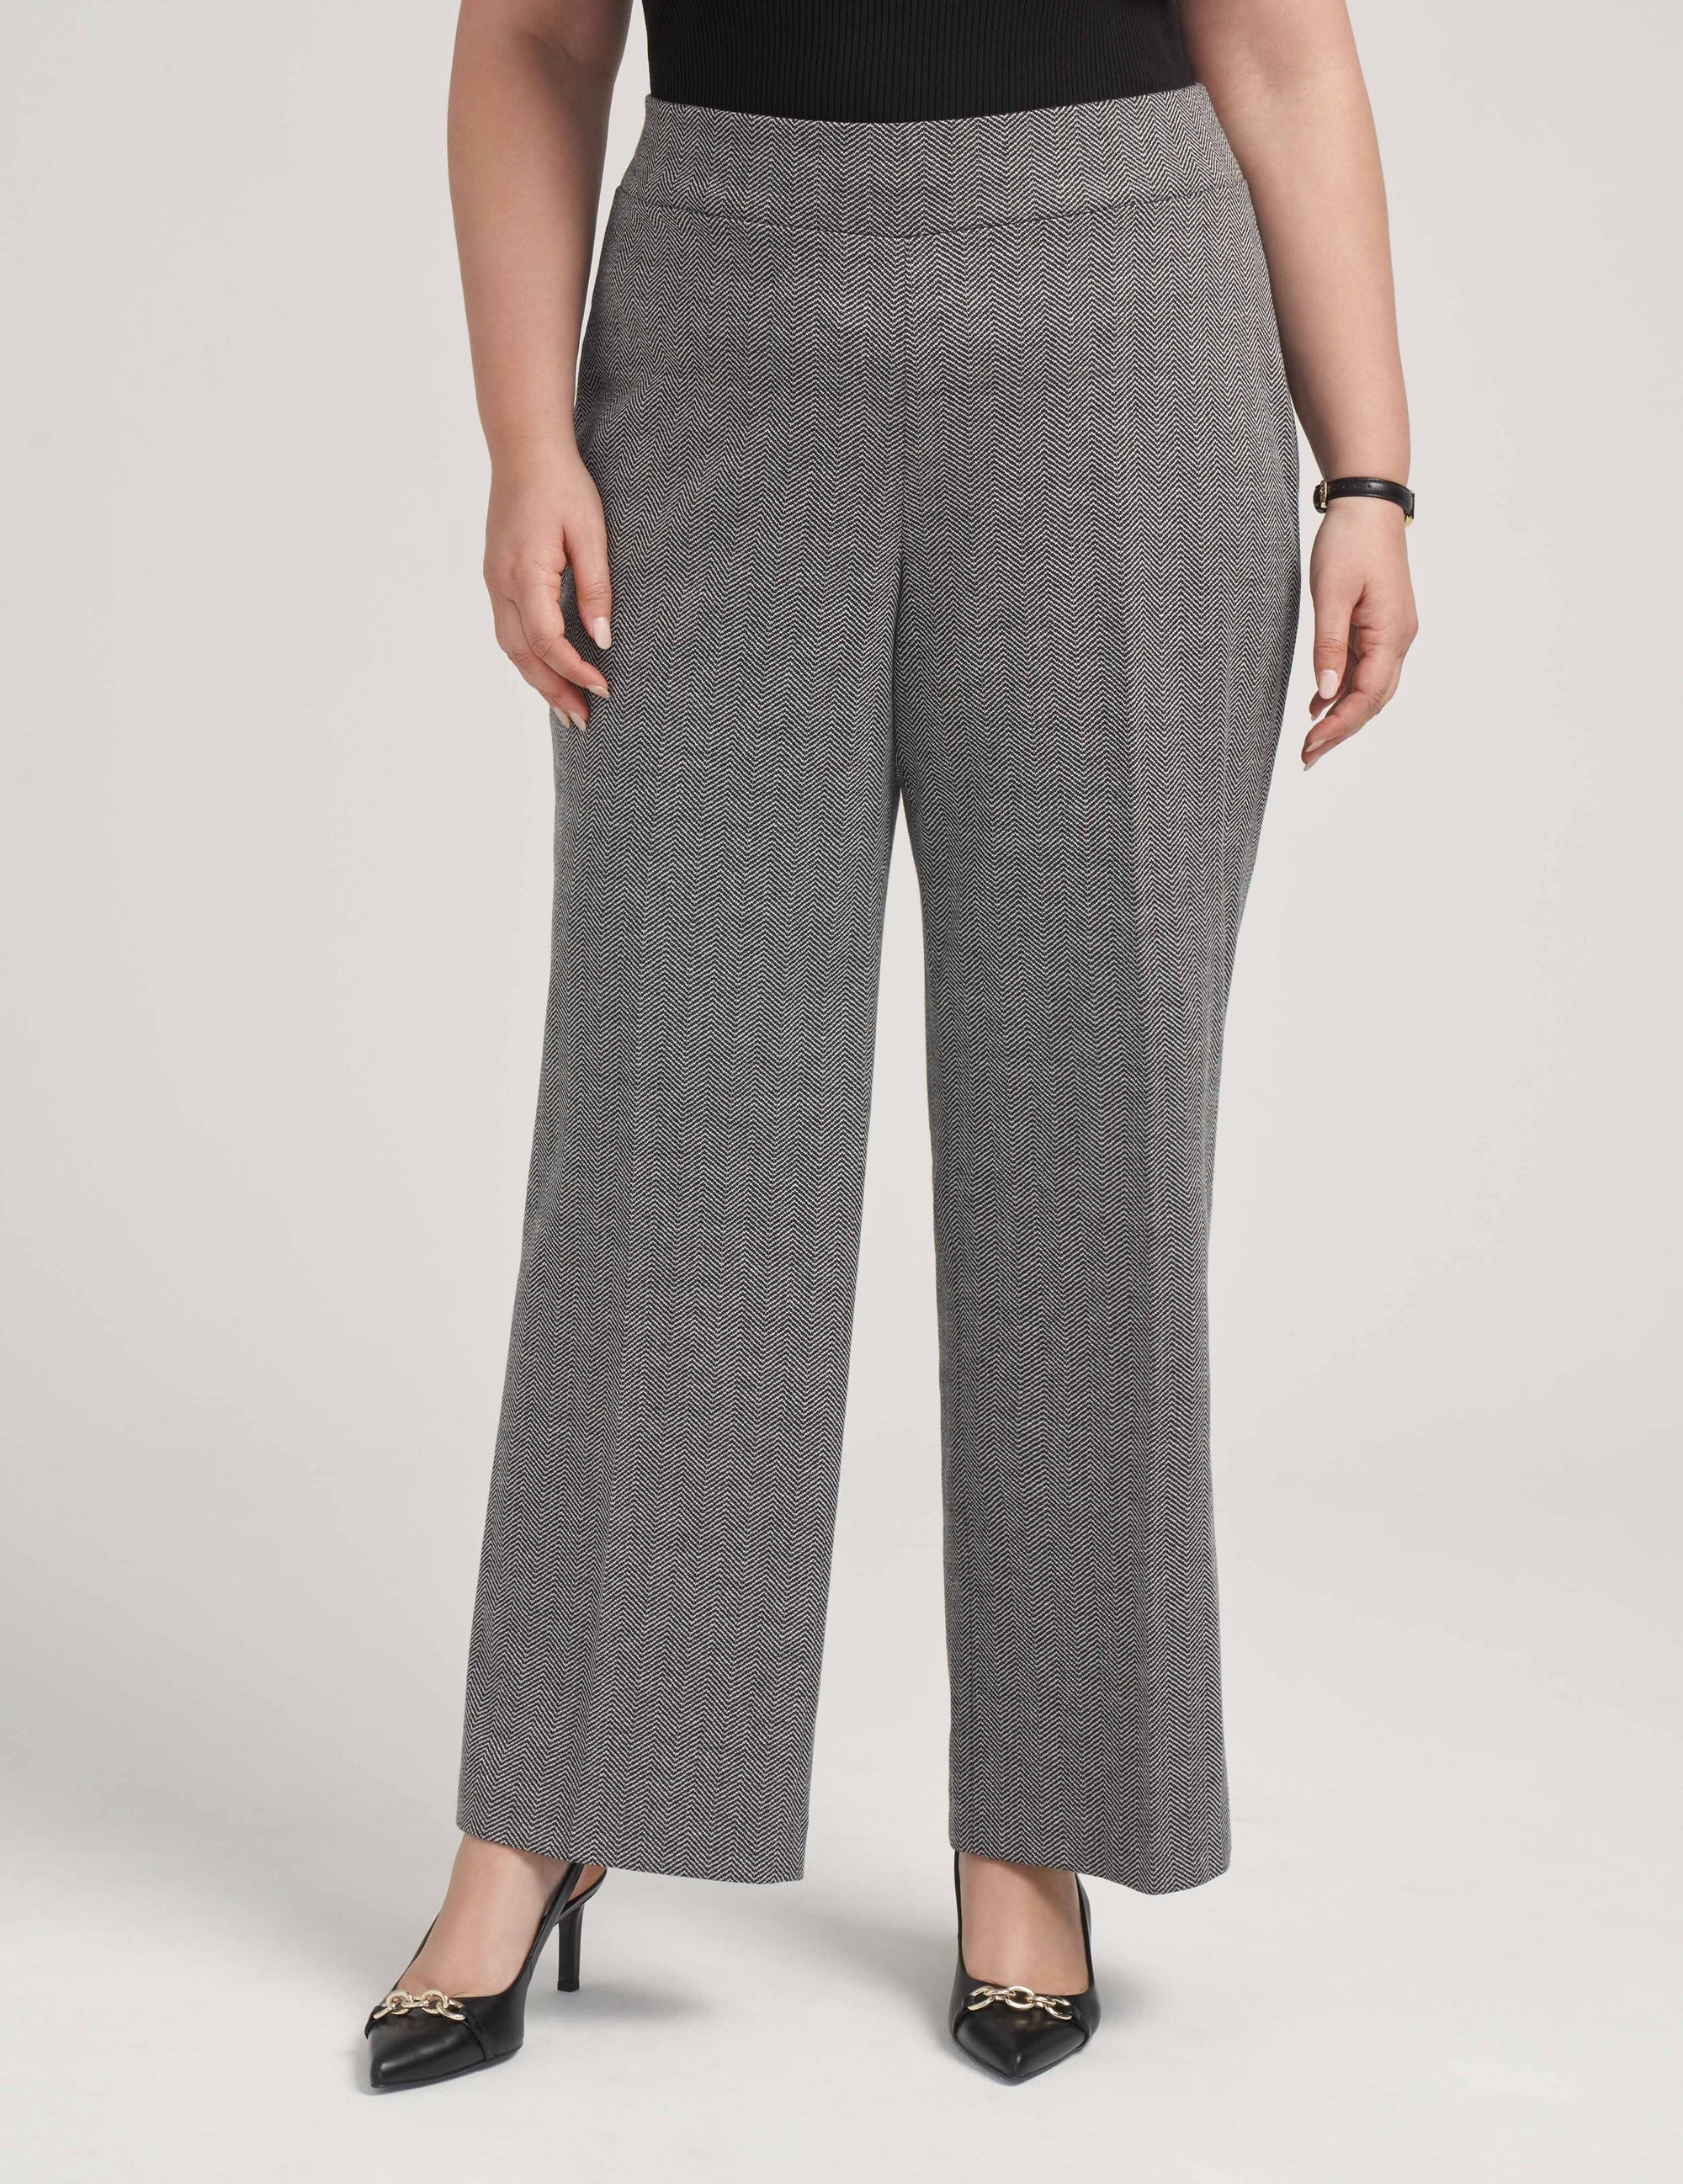 Plus Size Black Pull On Wide Leg Trousers